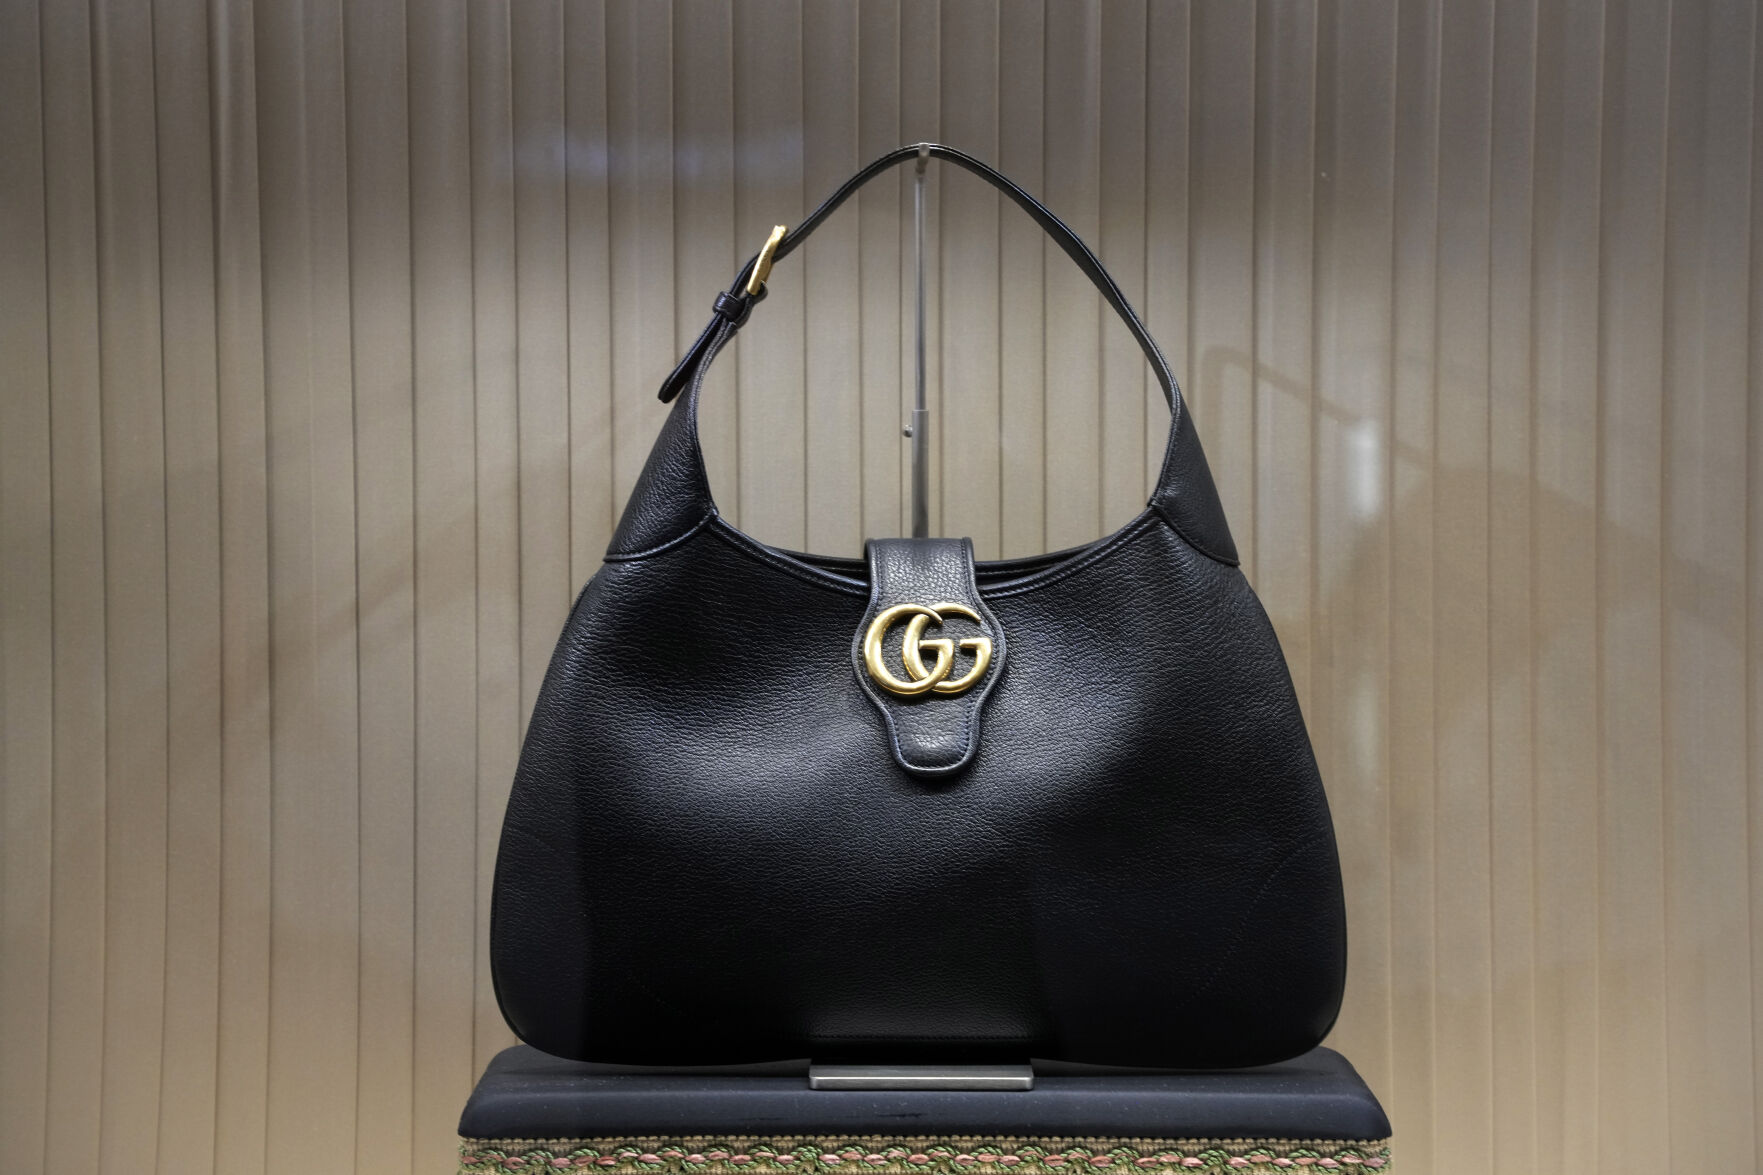 <p>File - A handbag is displayed in the window of a Gucci store in Pittsburgh on Monday, Jan. 30, 2023. On Friday, the Commerce Department issues its February report on consumer spending. (AP Photo/Gene J. Puskar, File)</p>   PHOTO CREDIT: Gene J. Puskar - staff, AP